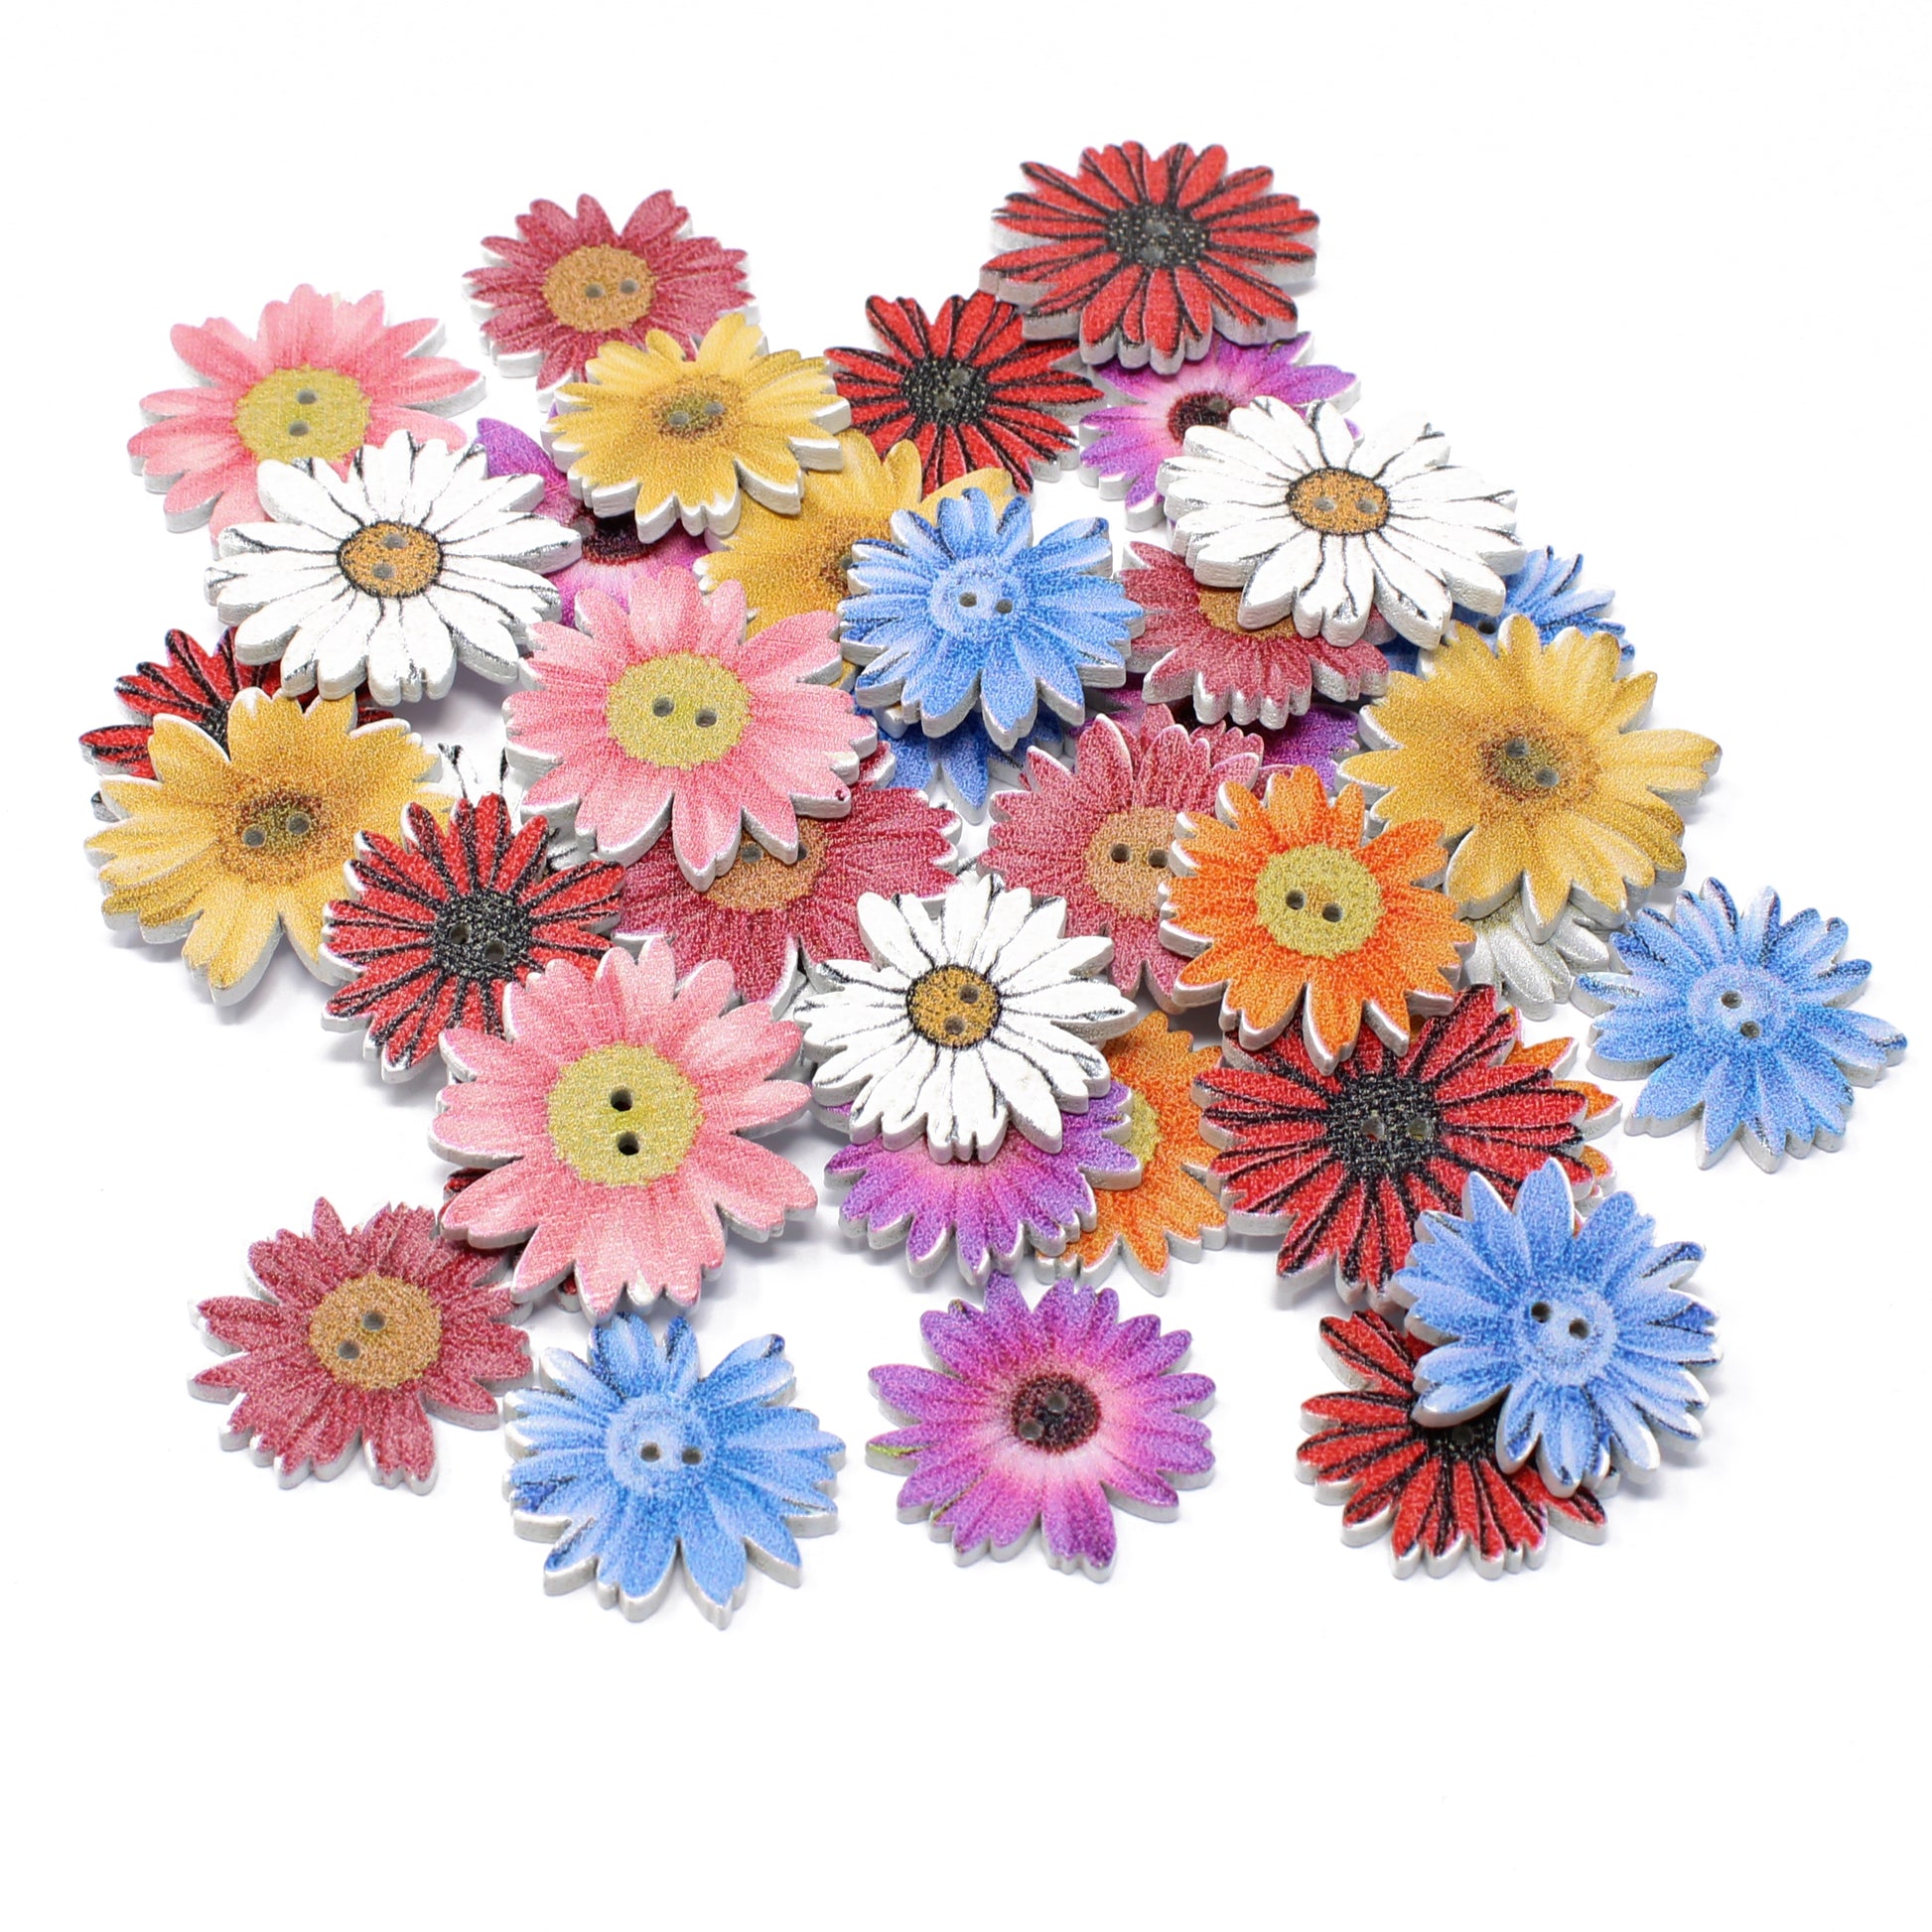 Daisy 40 Mixed Bright Flower & Butterfly Buttons